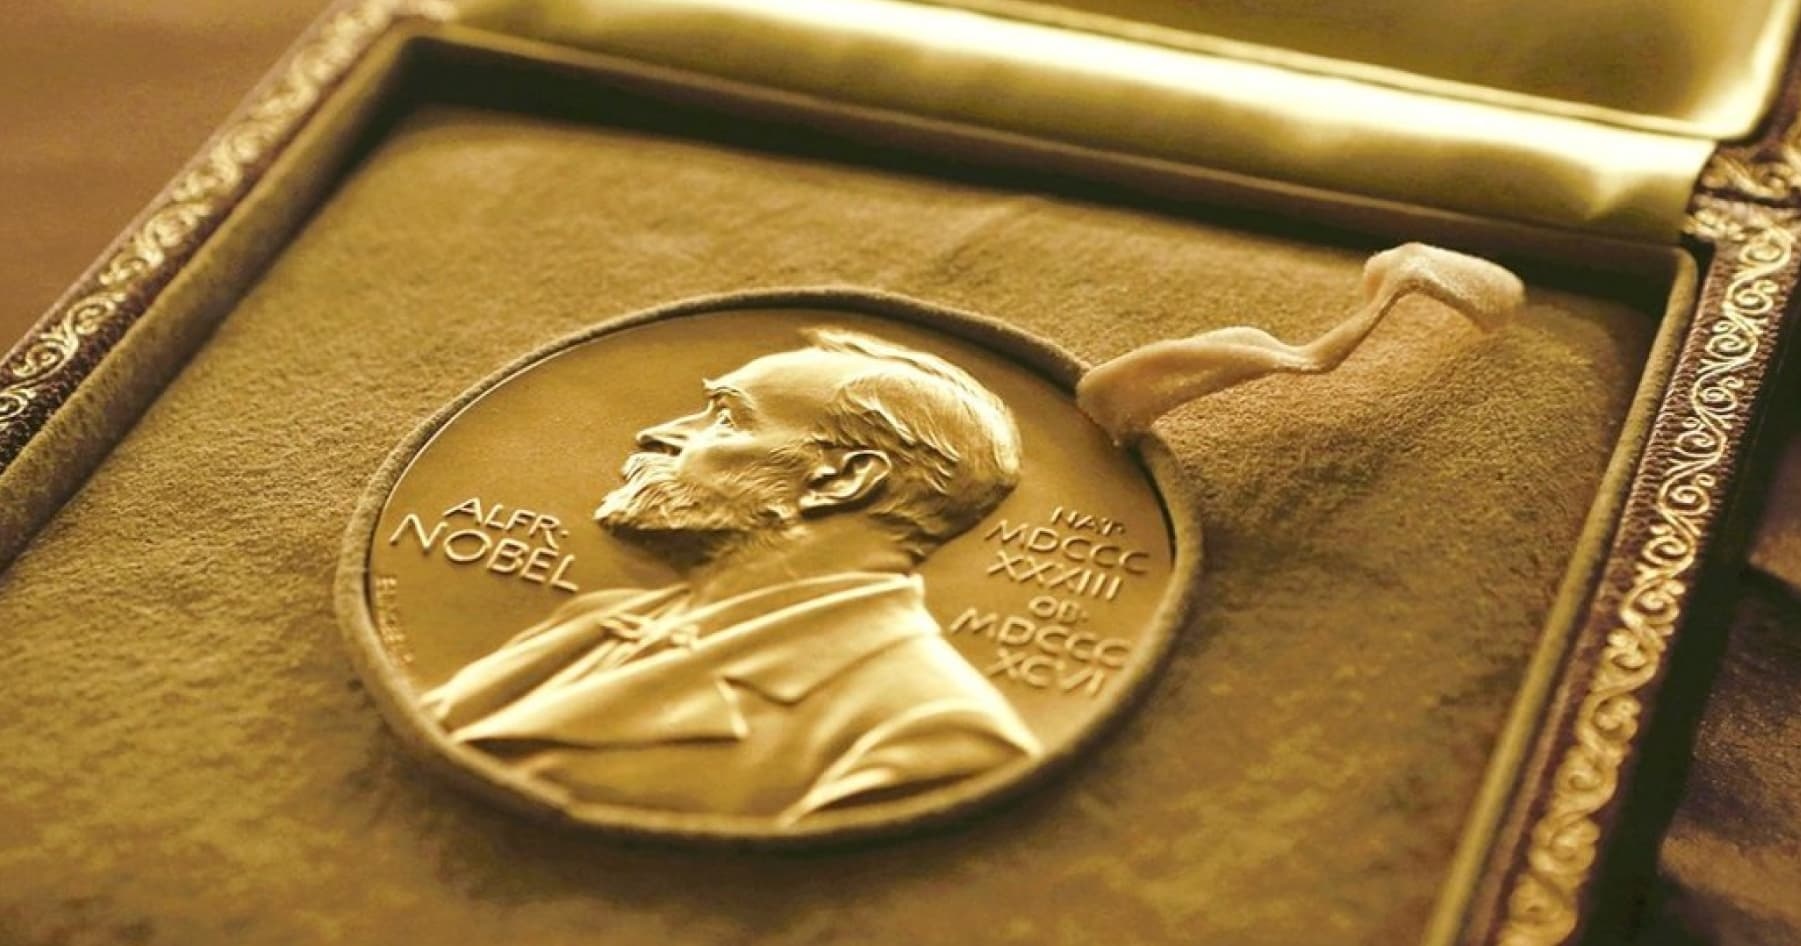 The Nobel Peace Prize was awarded to the Ukrainian human rights organization "Center for Civil Liberties," the human rights activist from Belarus Ales Bialiatski, and the Russian human rights organization "Memorial"